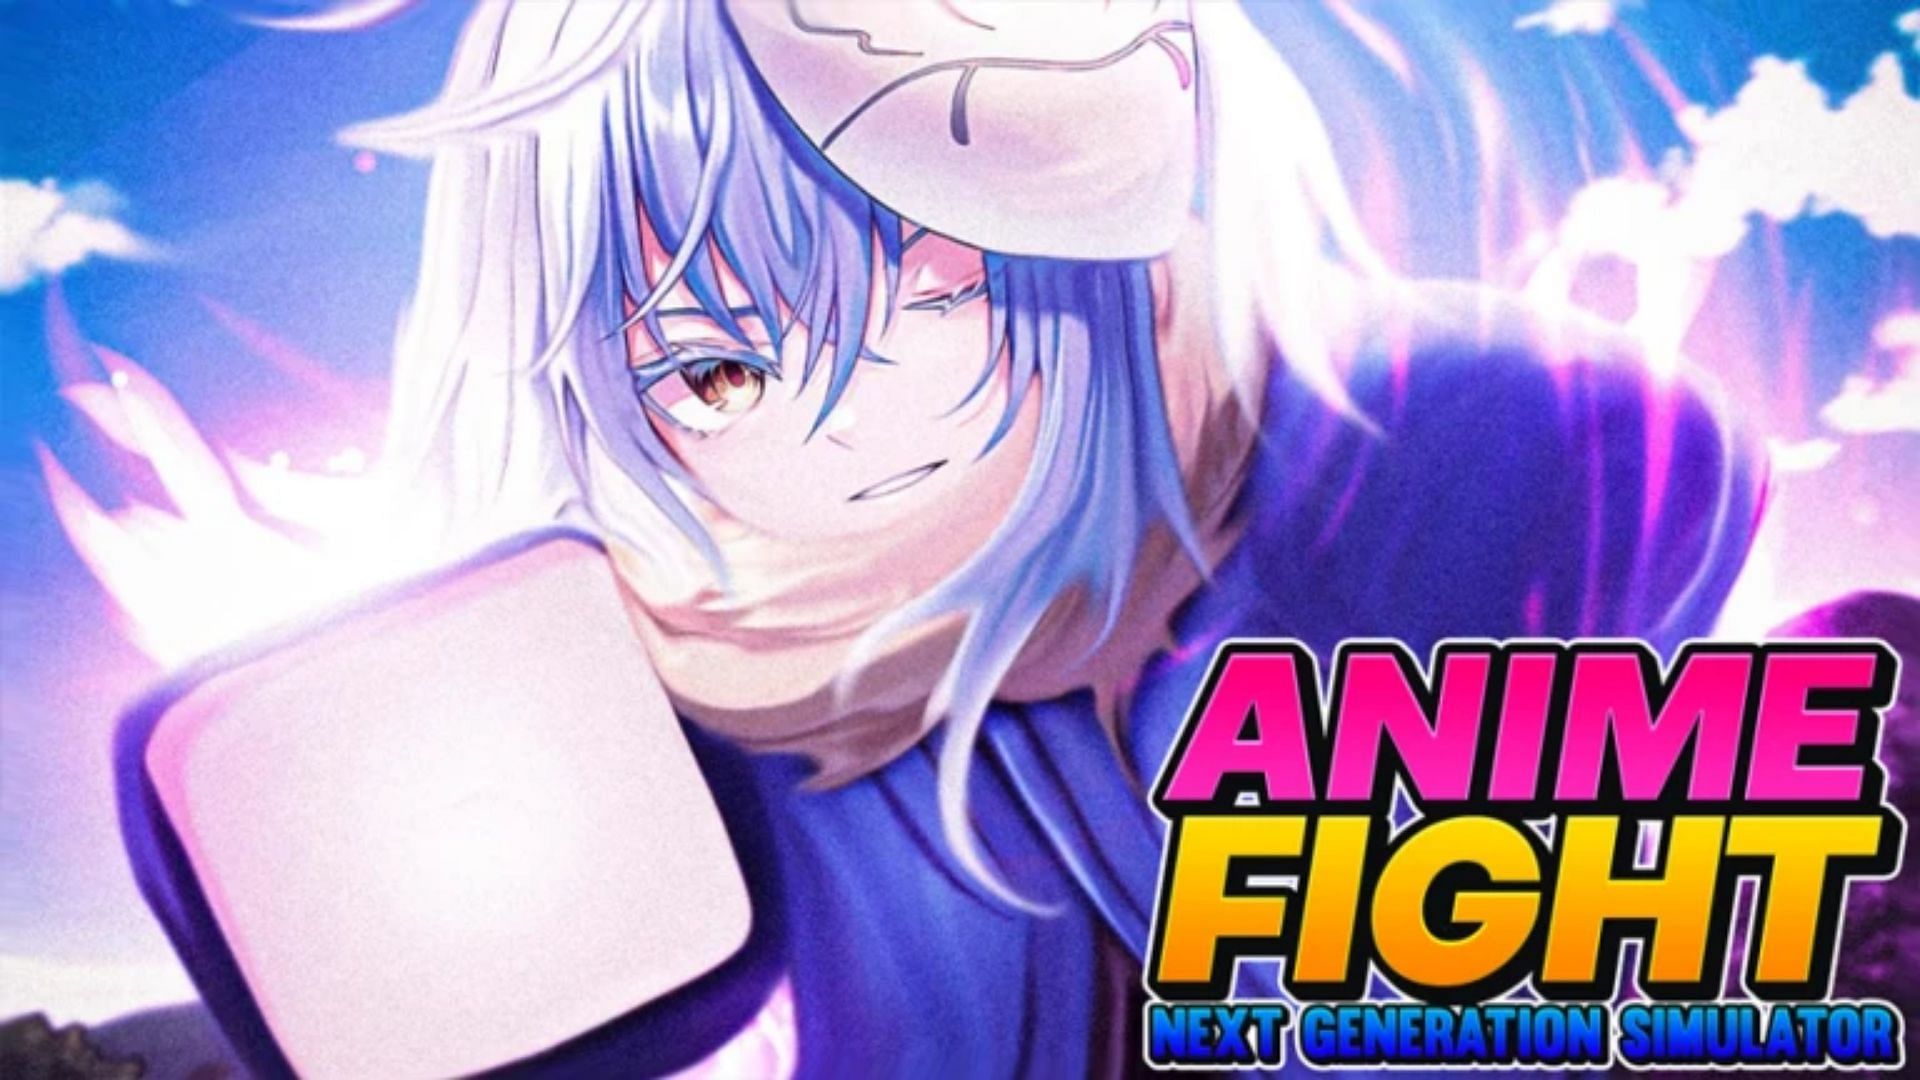 Codes for Anime Fight Next Generation and their importance (Image via Roblox)